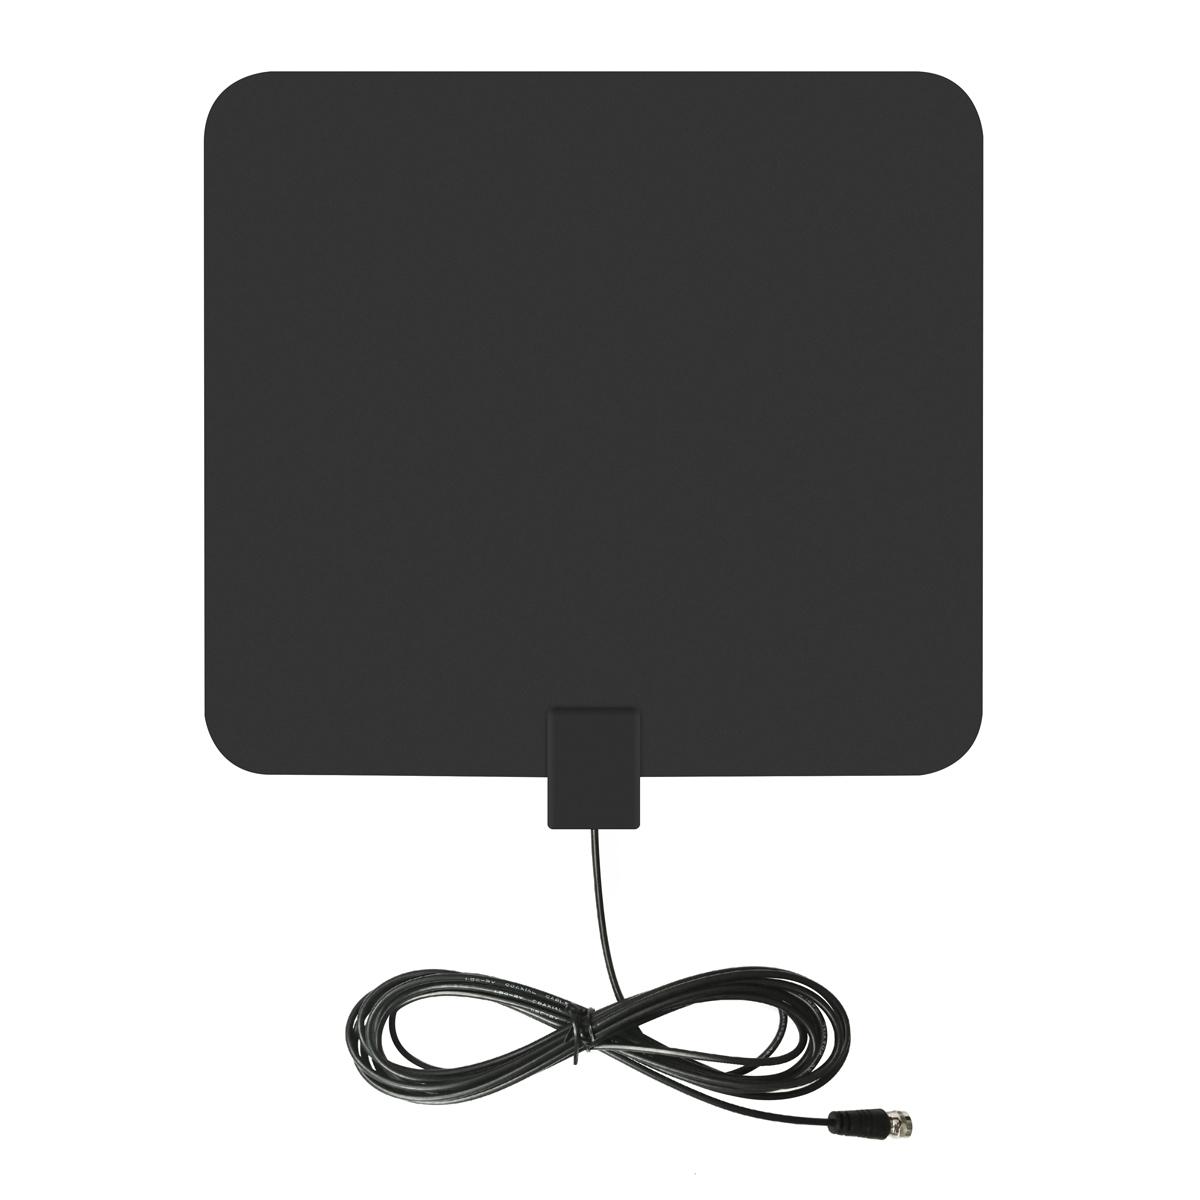 Onn Ultra-Thin Multi-Directional Indoor Antenna for $5.93